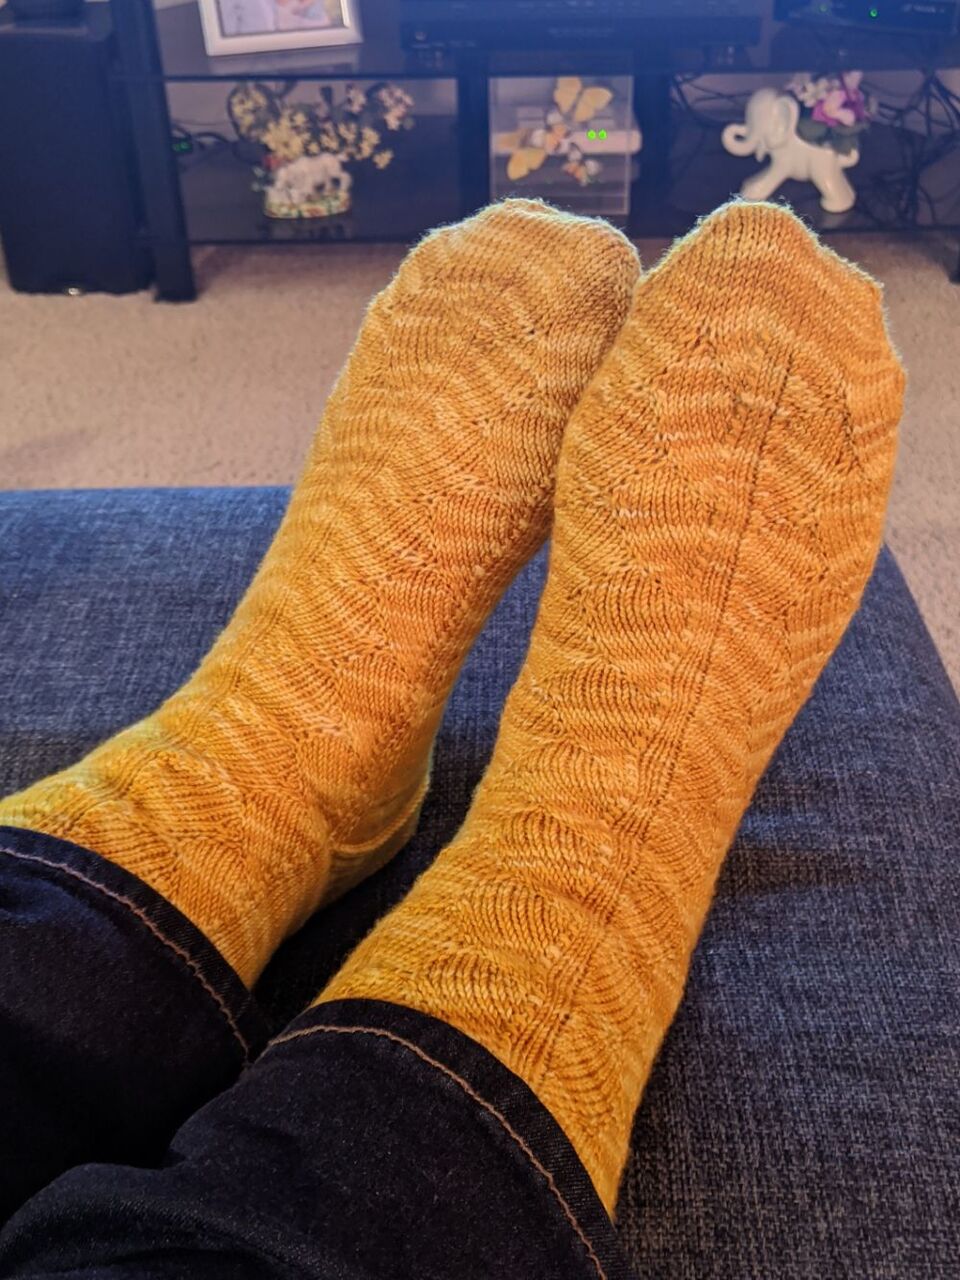 A picture of a pair of yellow socks with a scalloped design that I knit for Lenore.